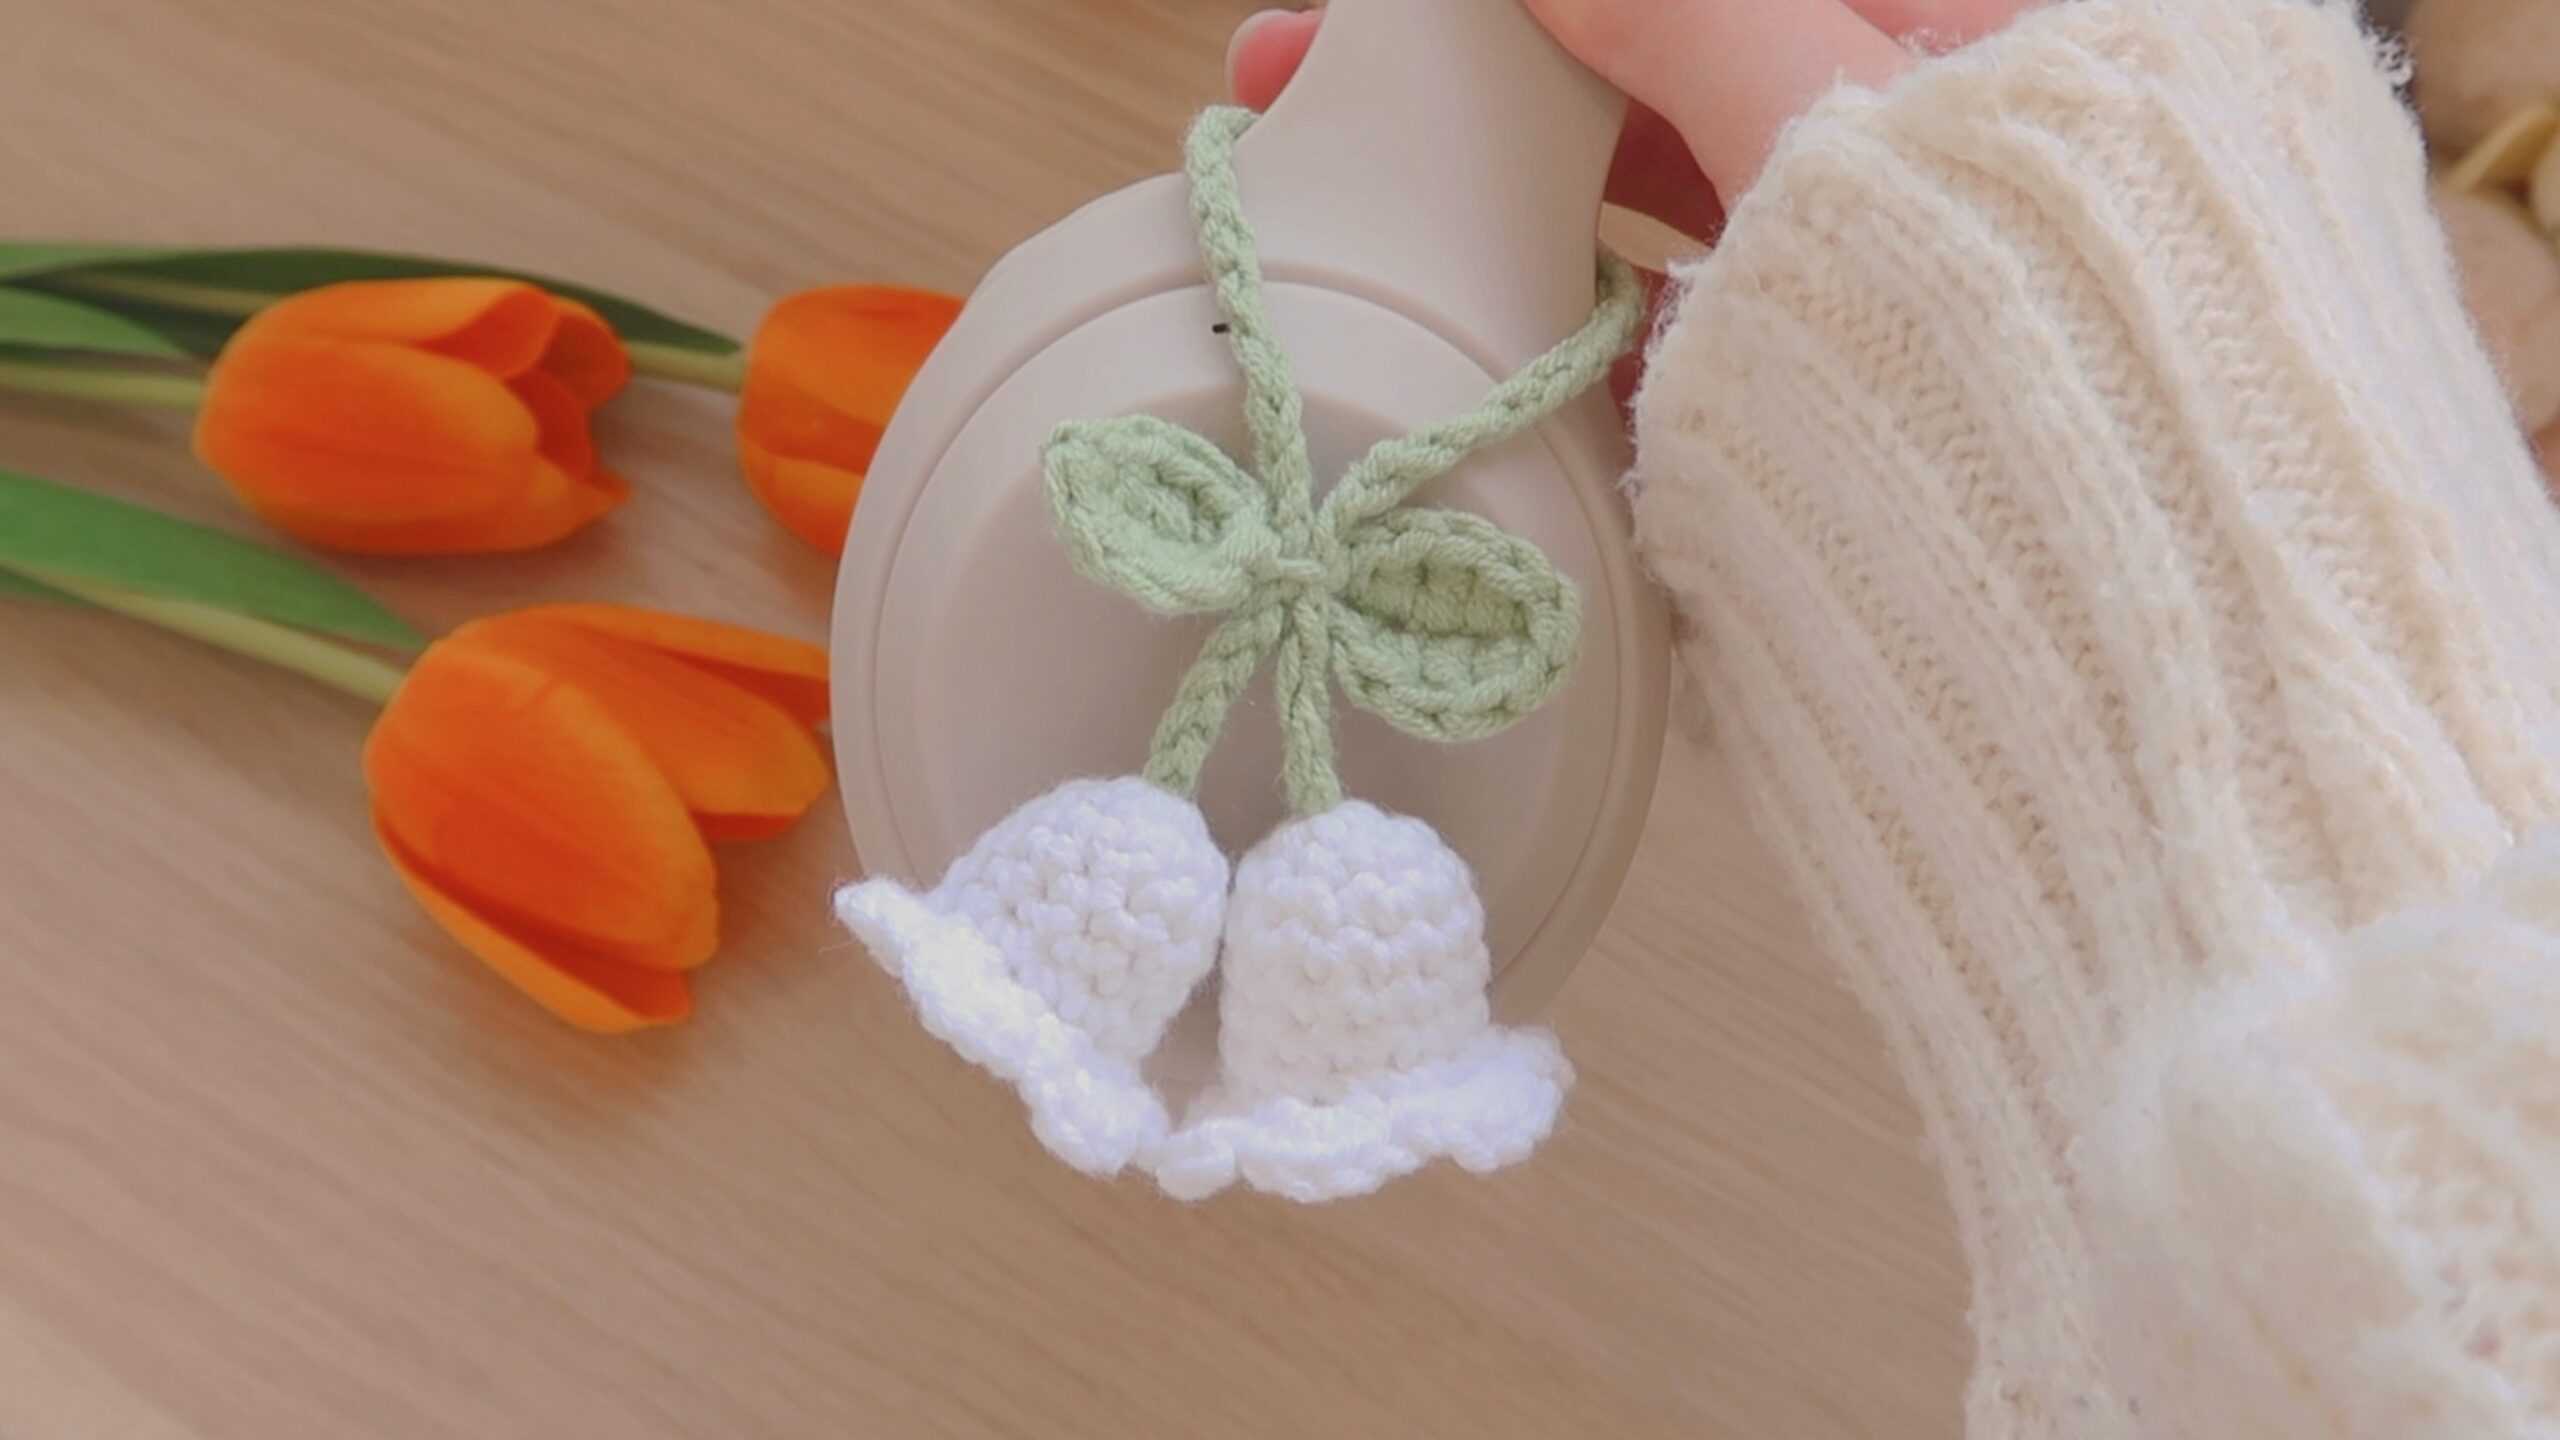 Crocheting the Lily of the Valley: A Beginner’s Guide